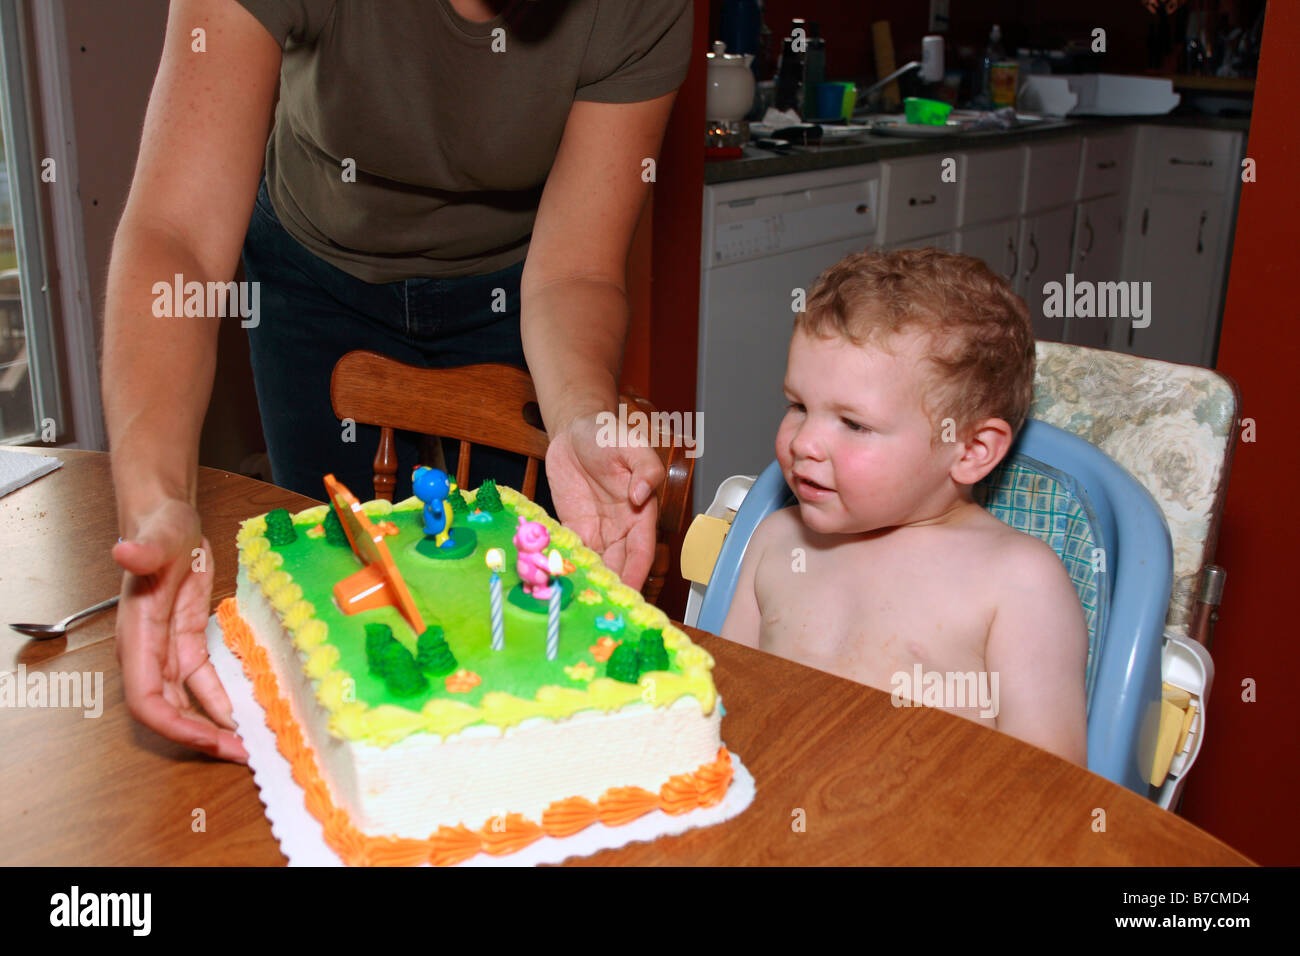 a 2 year old and his birthday cake Stock Photo - Alamy